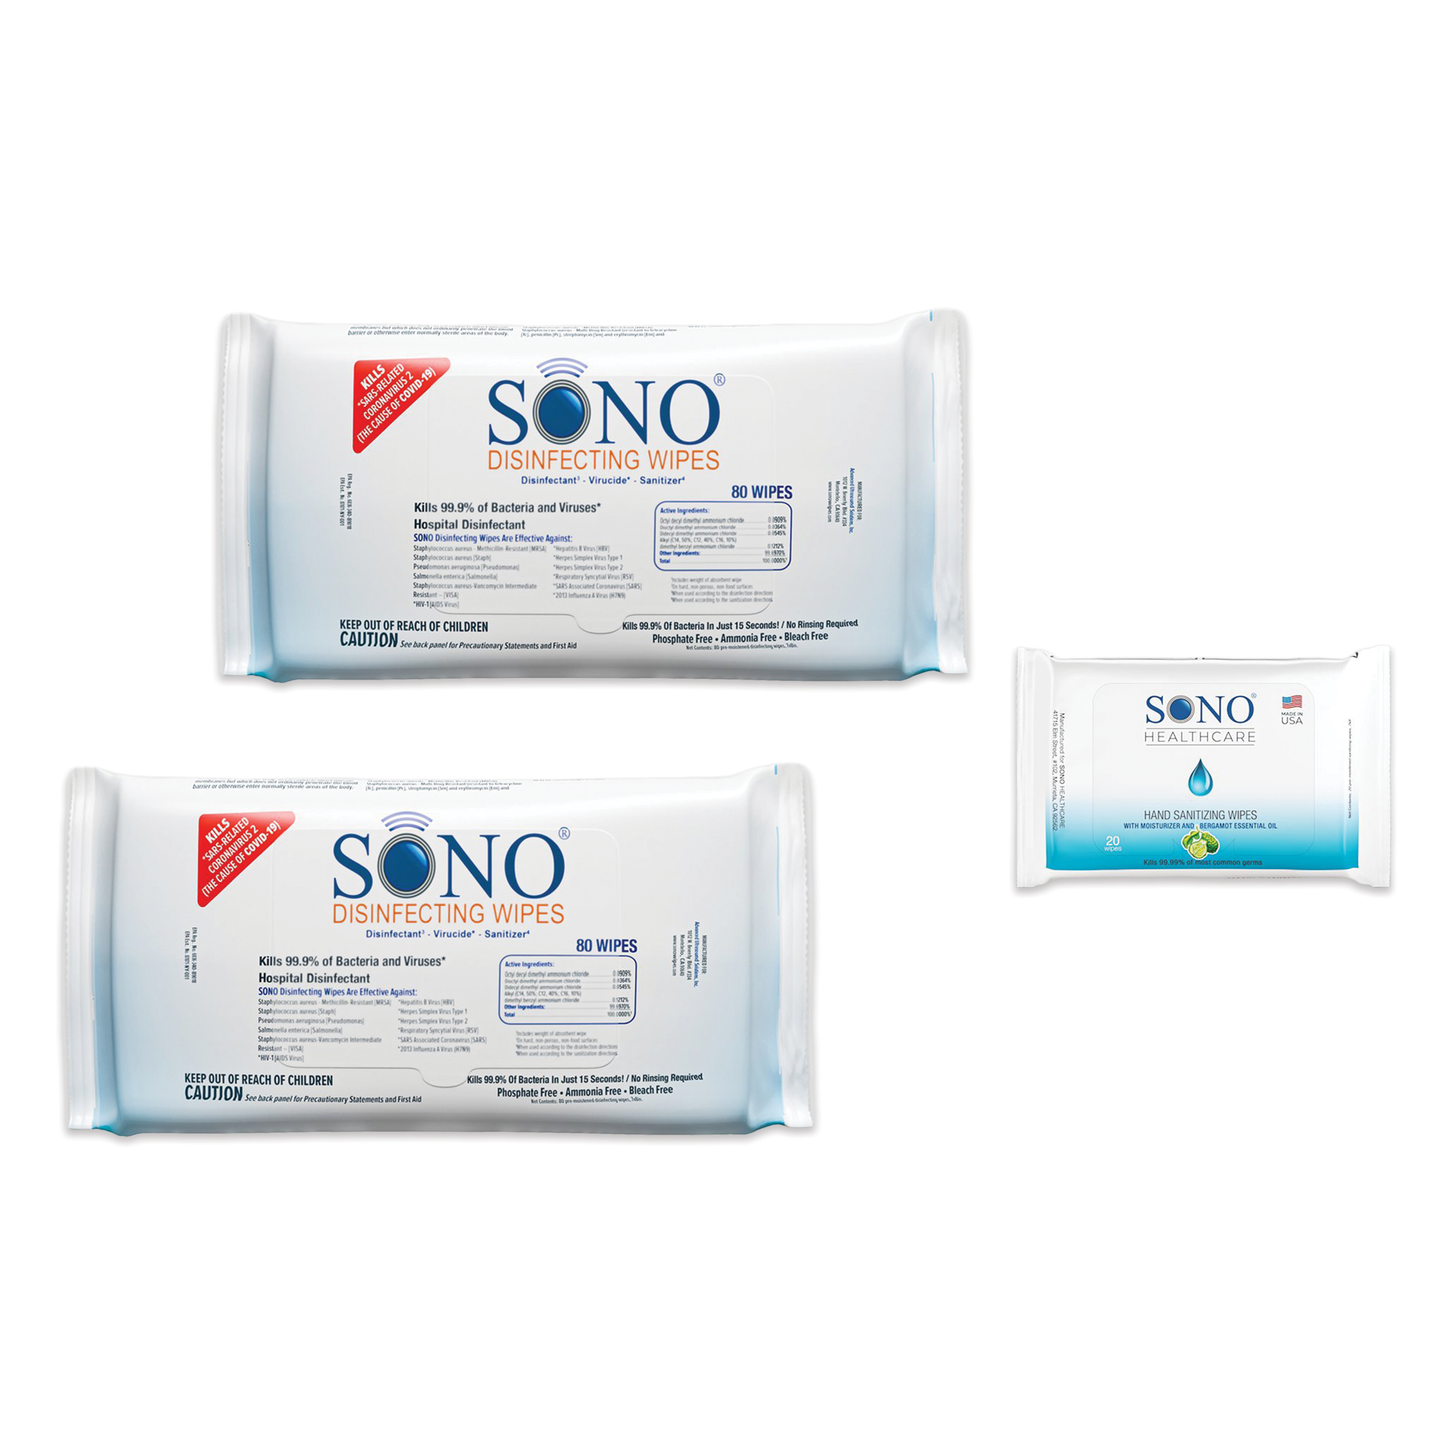 SONO Disinfecting Wipes - Large Soft Packs - 80 ct (2 PACK)